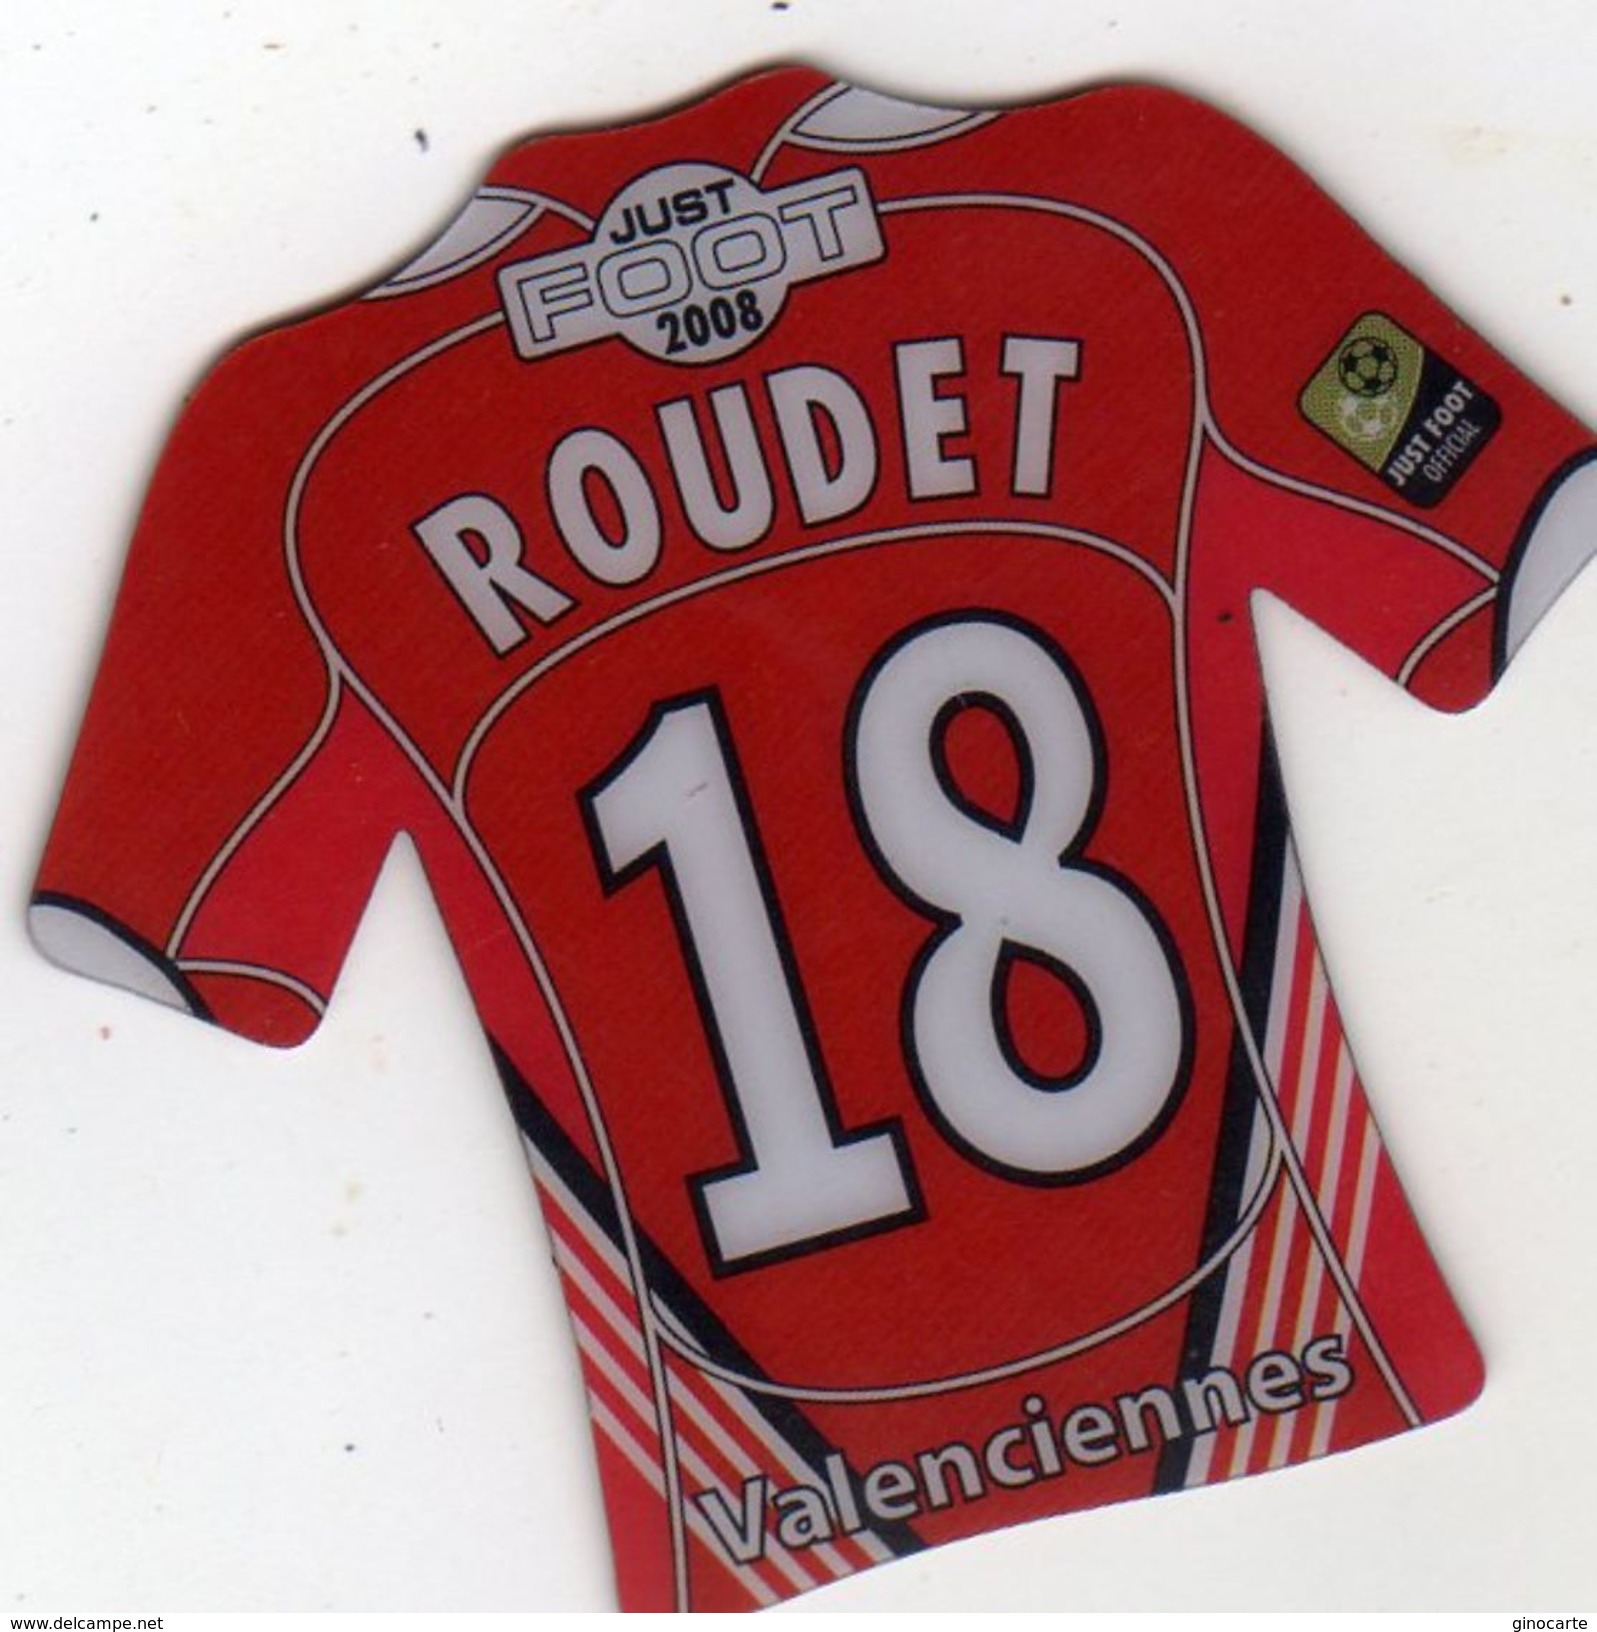 Magnet Magnets Maillot De Football Pitch Valenciennes Roudet 2008 - Sports